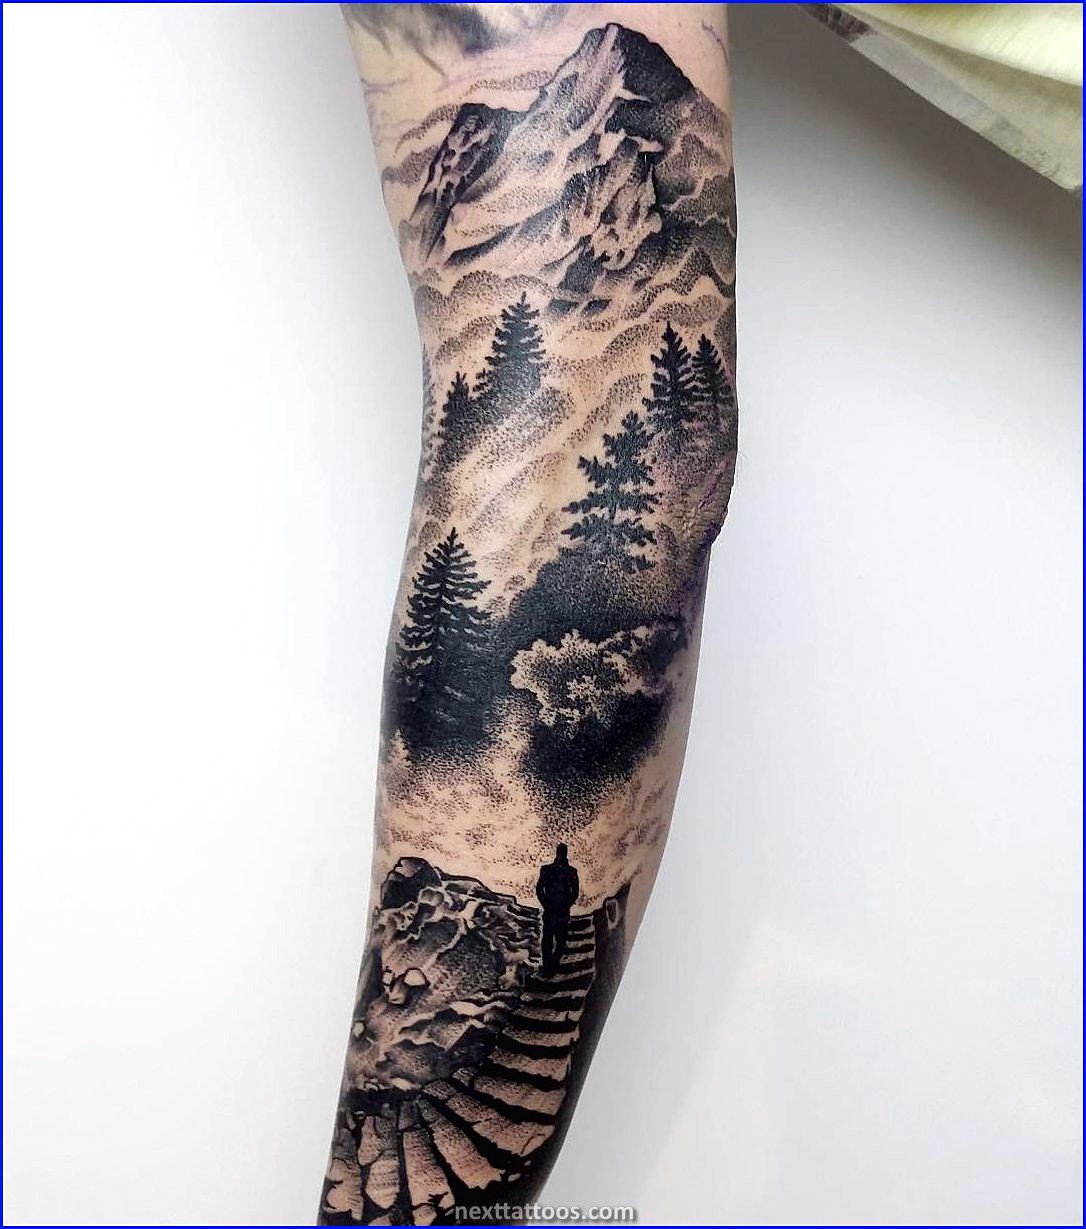 Nature Tattoos Forearm - Show Off Your Wild Side